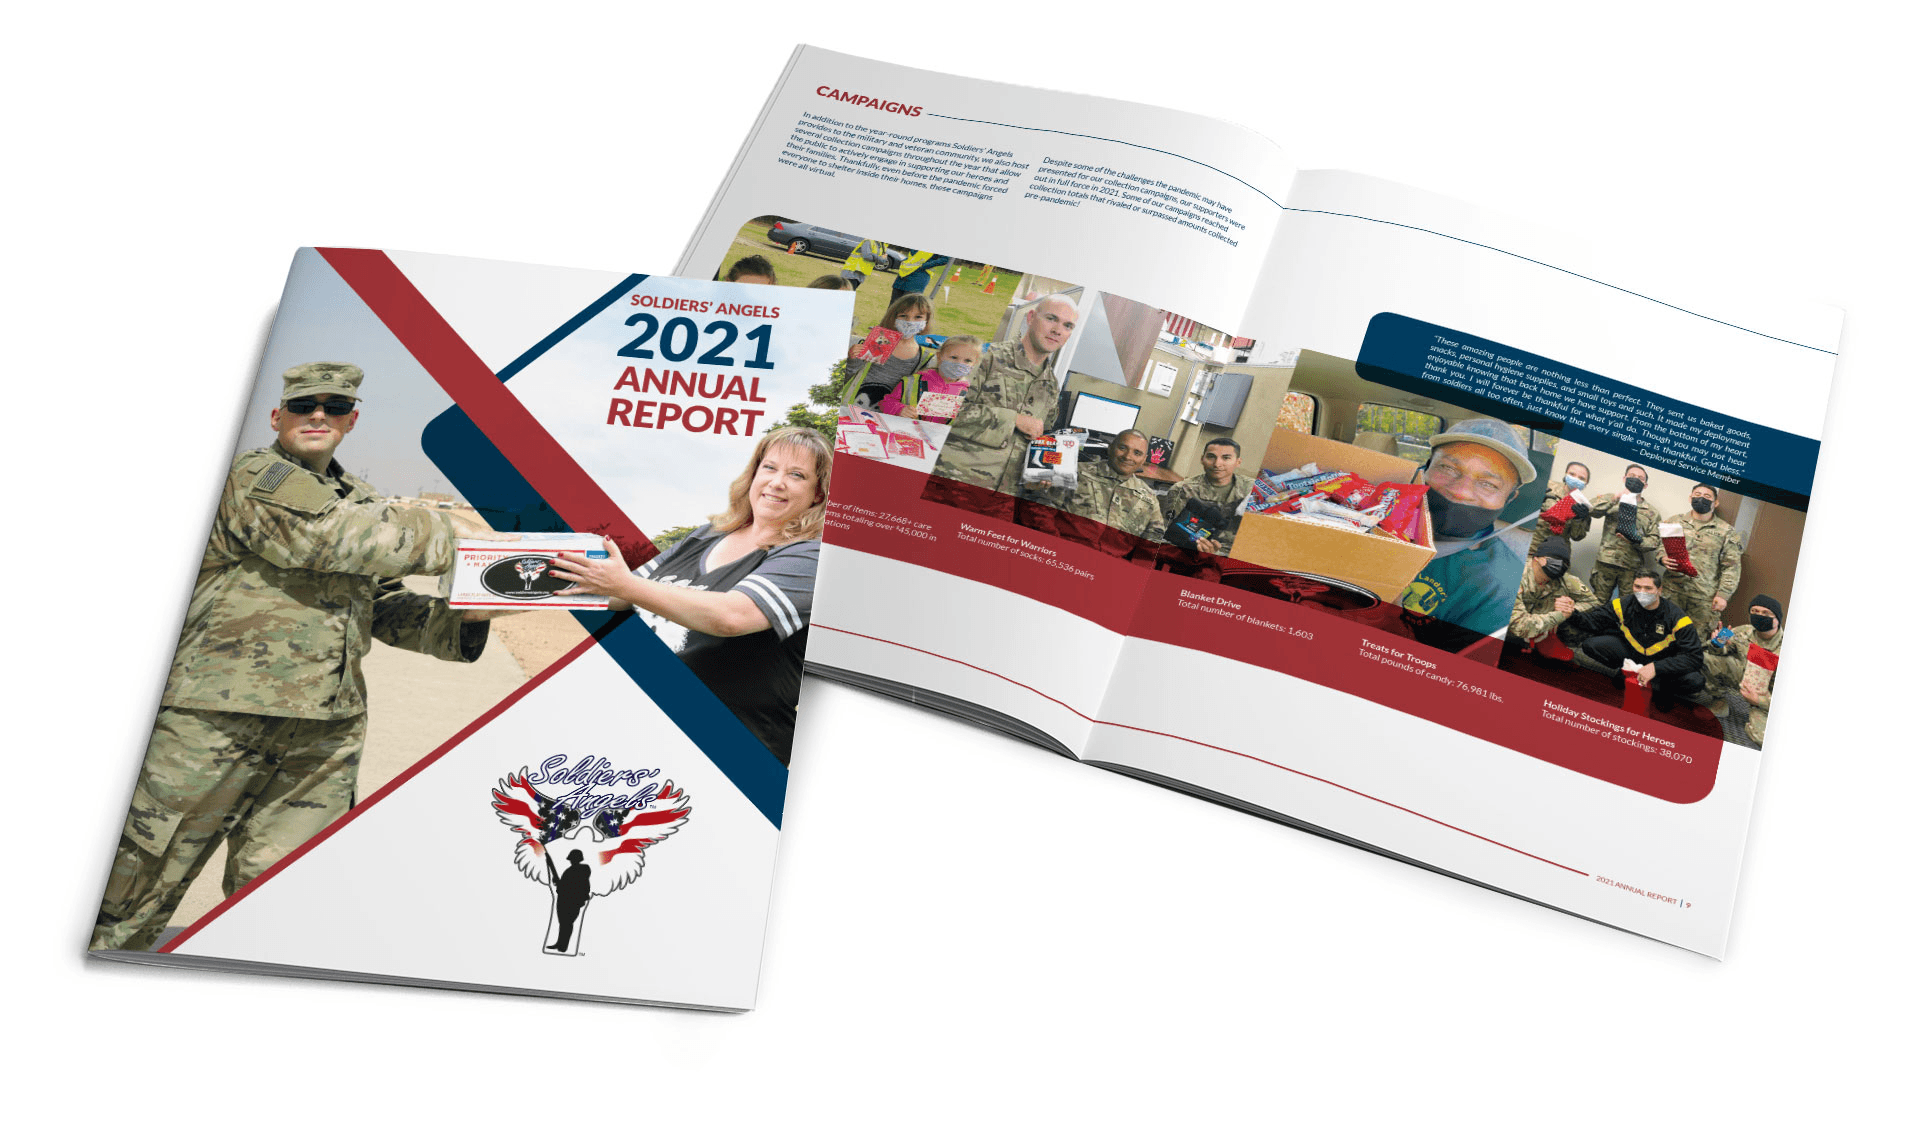 Soldiers’ Angels 2021 Annual Report